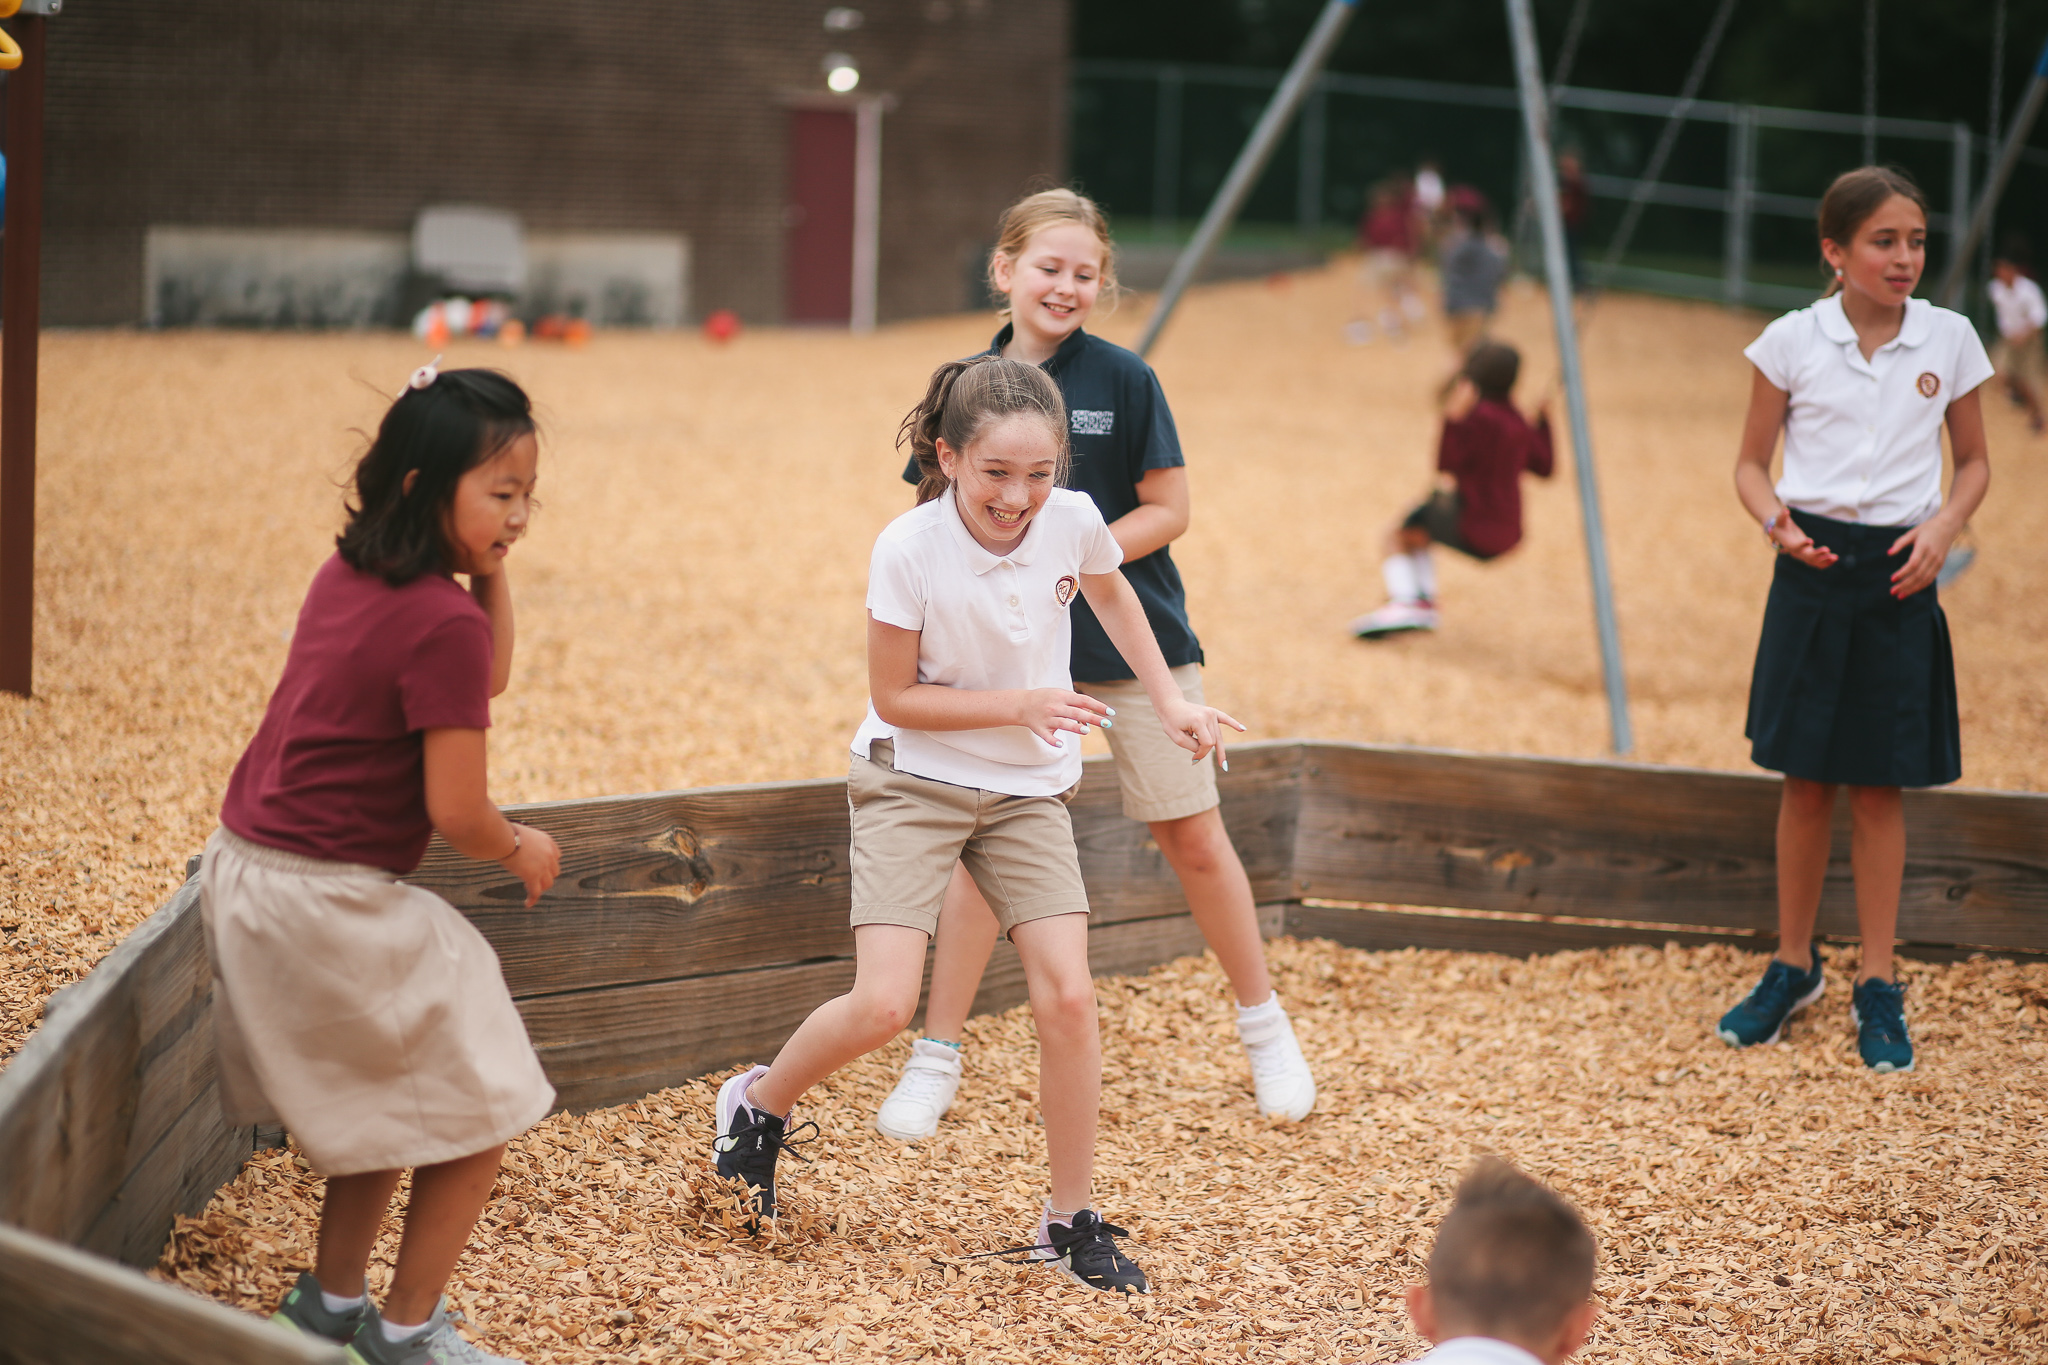 A group of young girls from a Christian school playing in a playground.